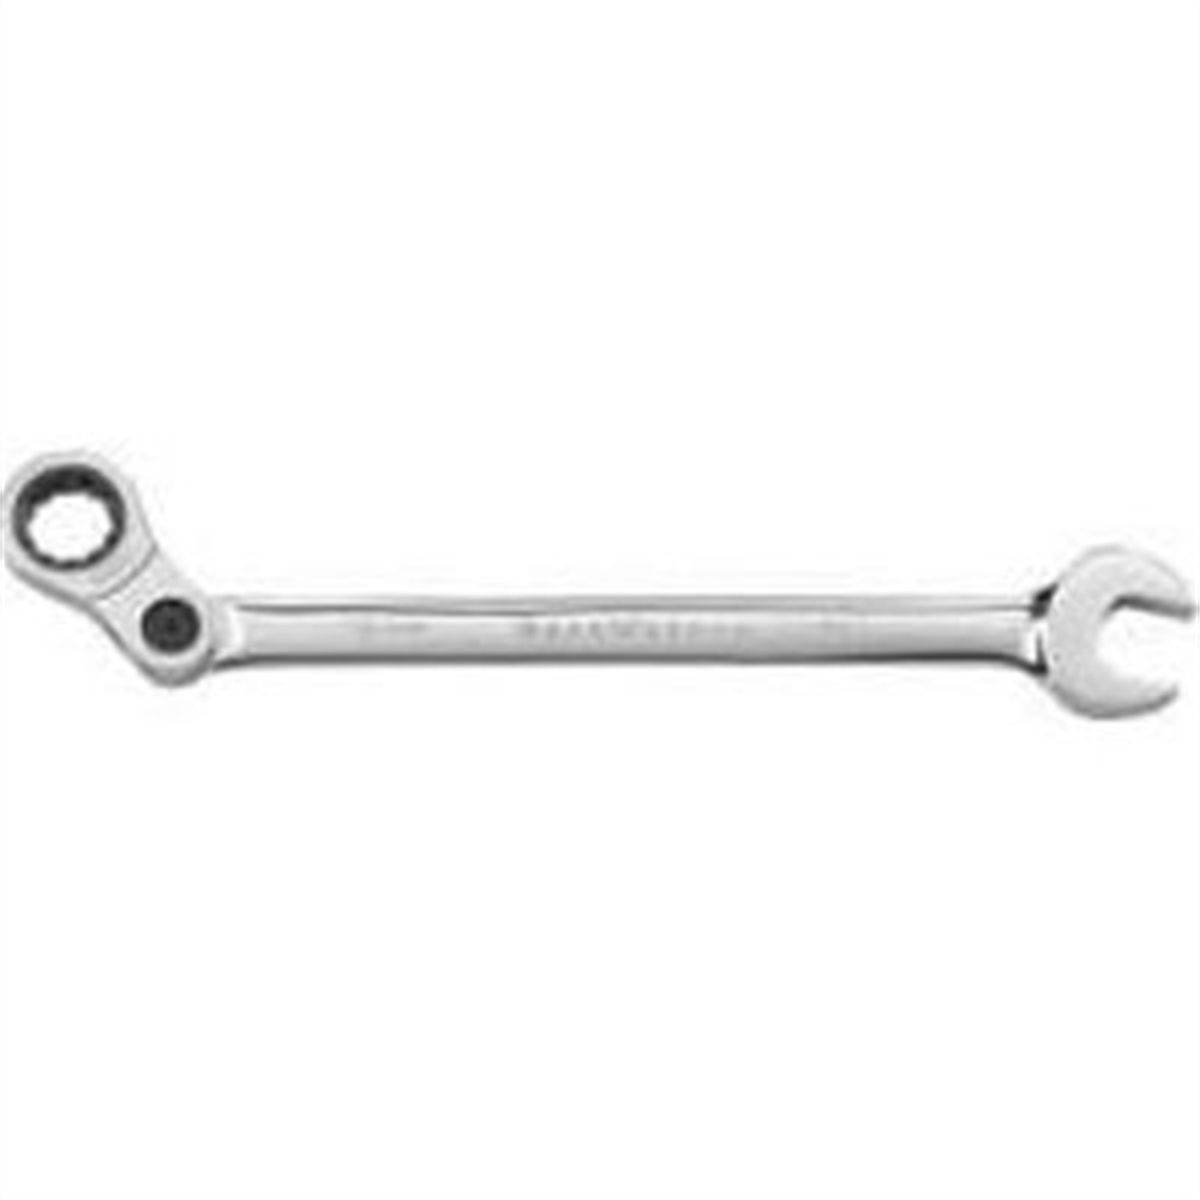 12 mm Indexing Combination Wrench